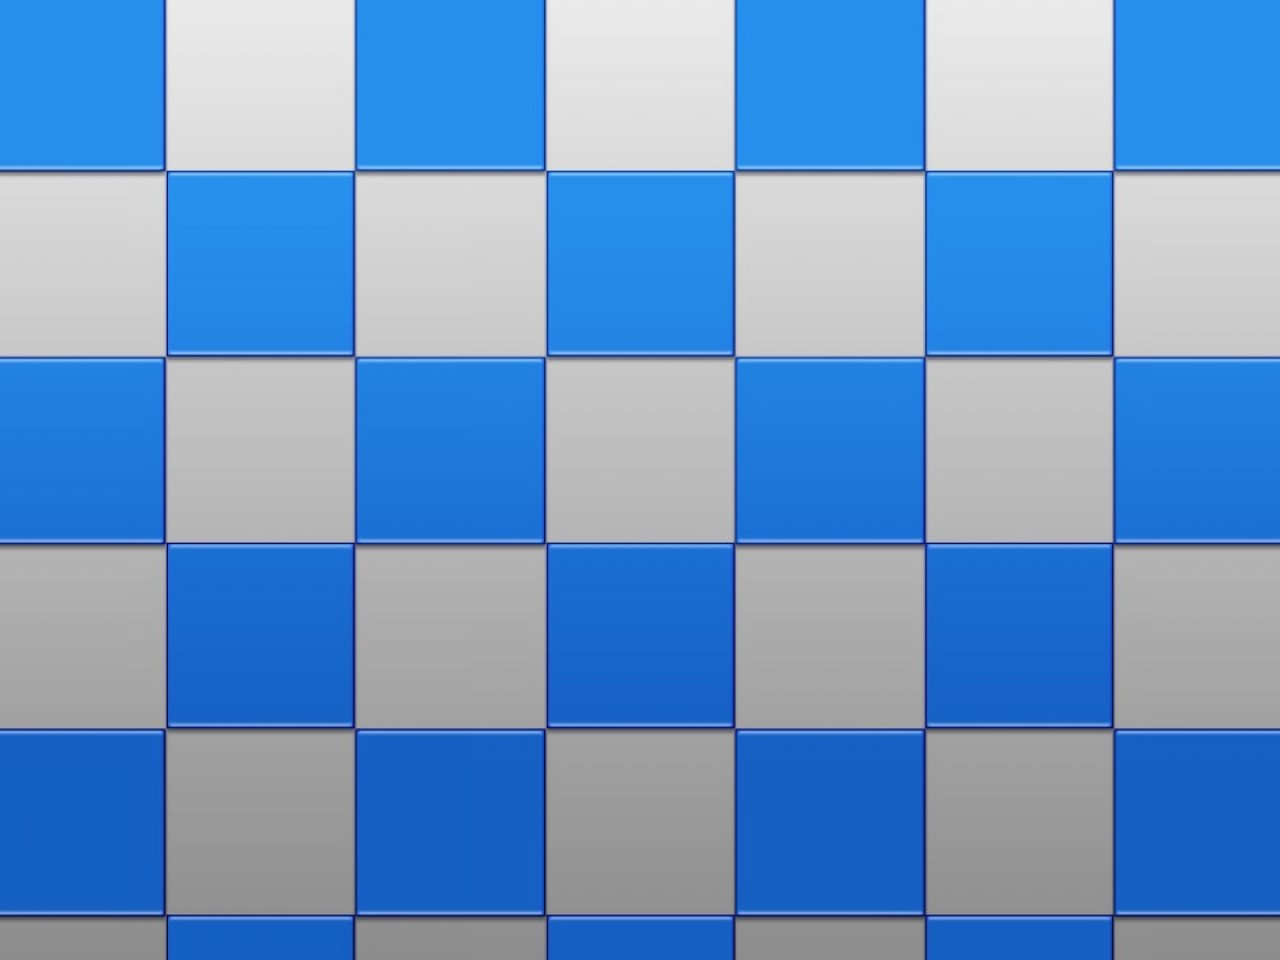 Blue Square Wallpaper   HD Wallpapers